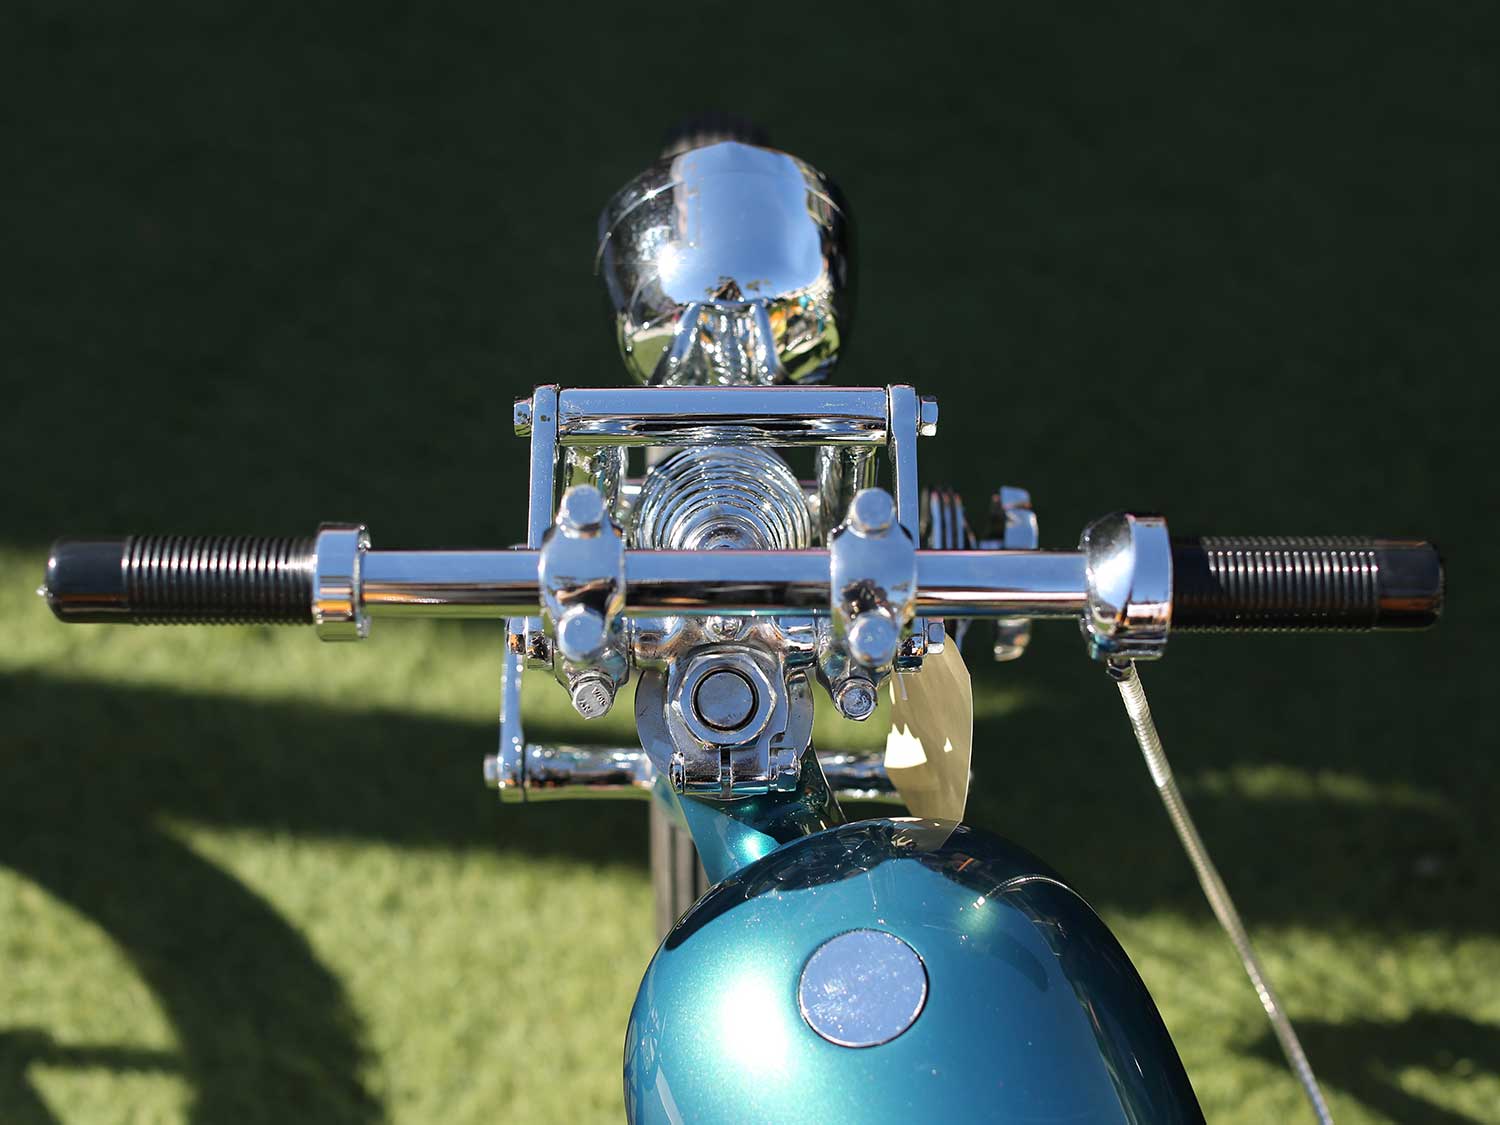 A clean and polished handlebar and front end setup on this skinny Panhead chopper.